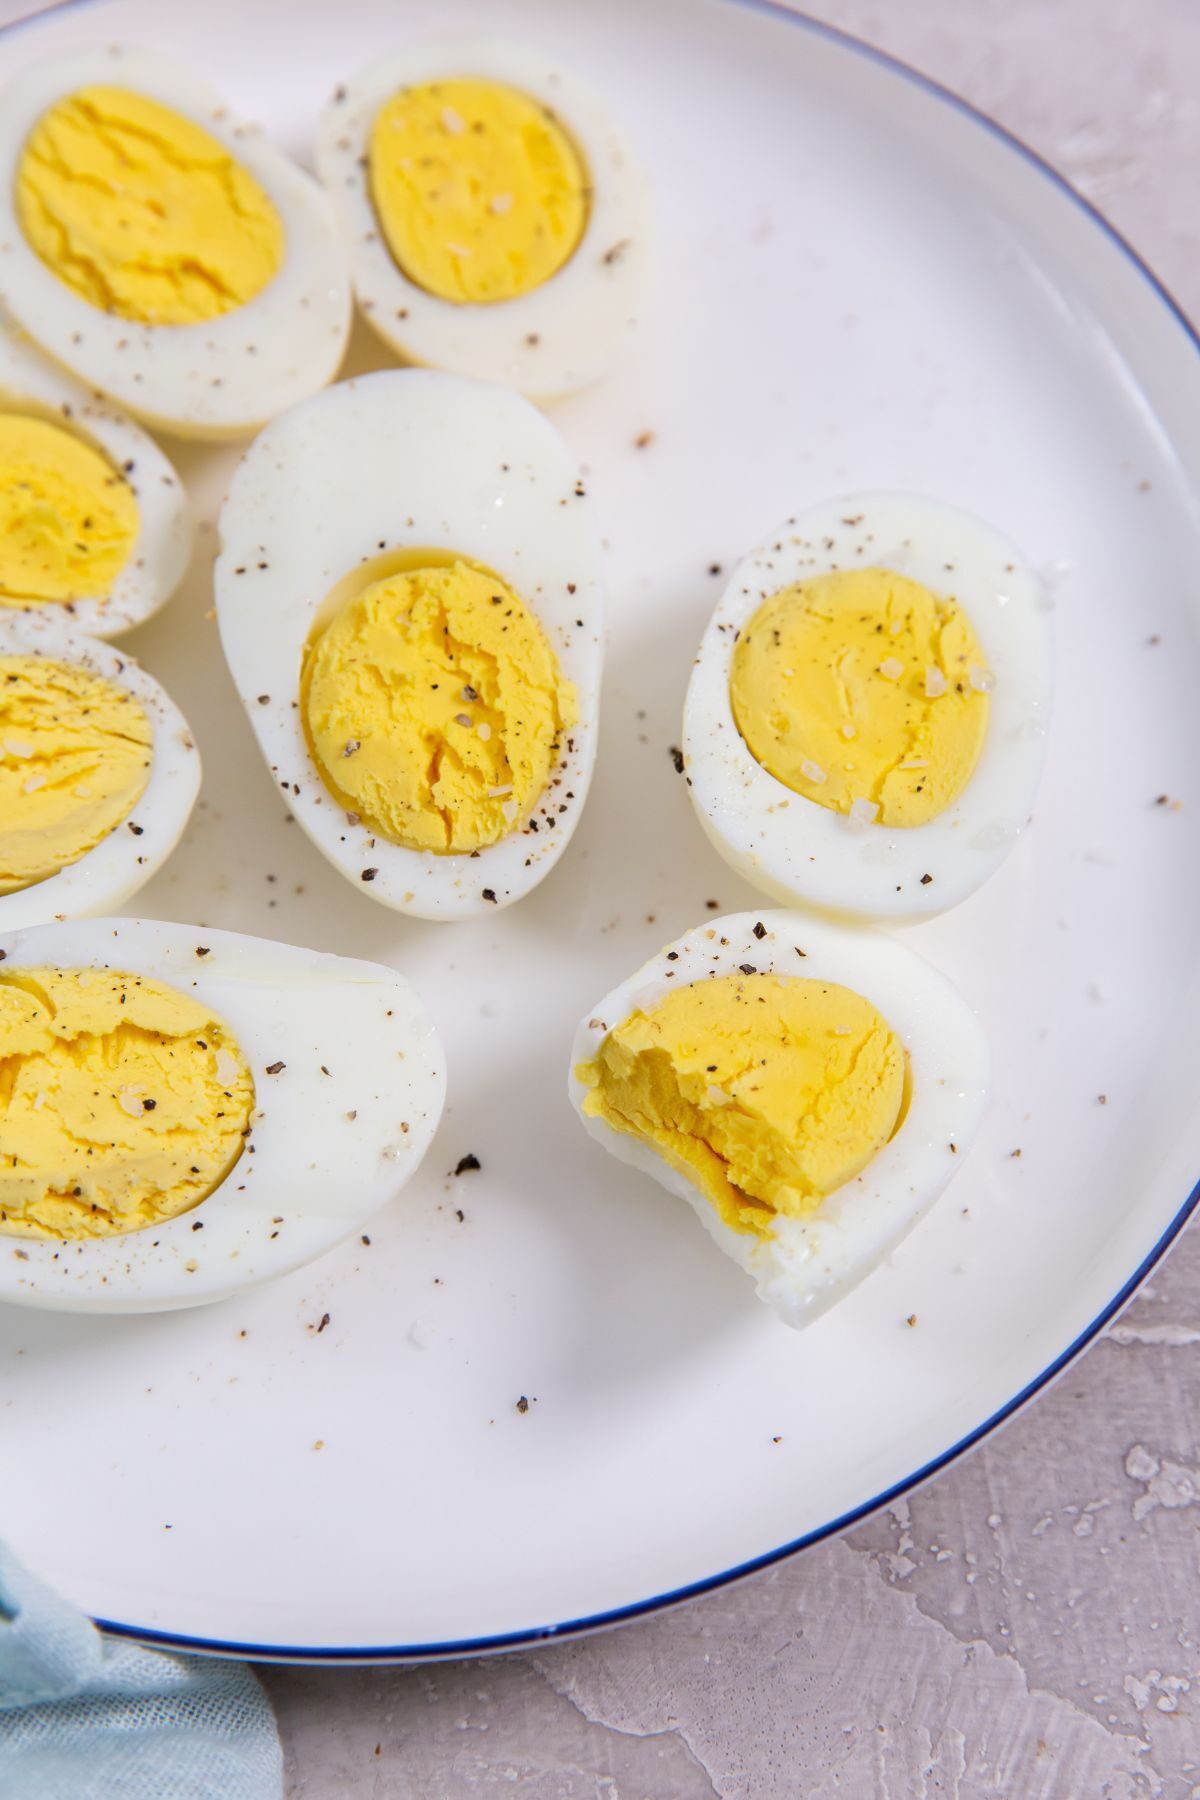 Instant Pot Eggs 5-5-5 Method cut in half on a white plate